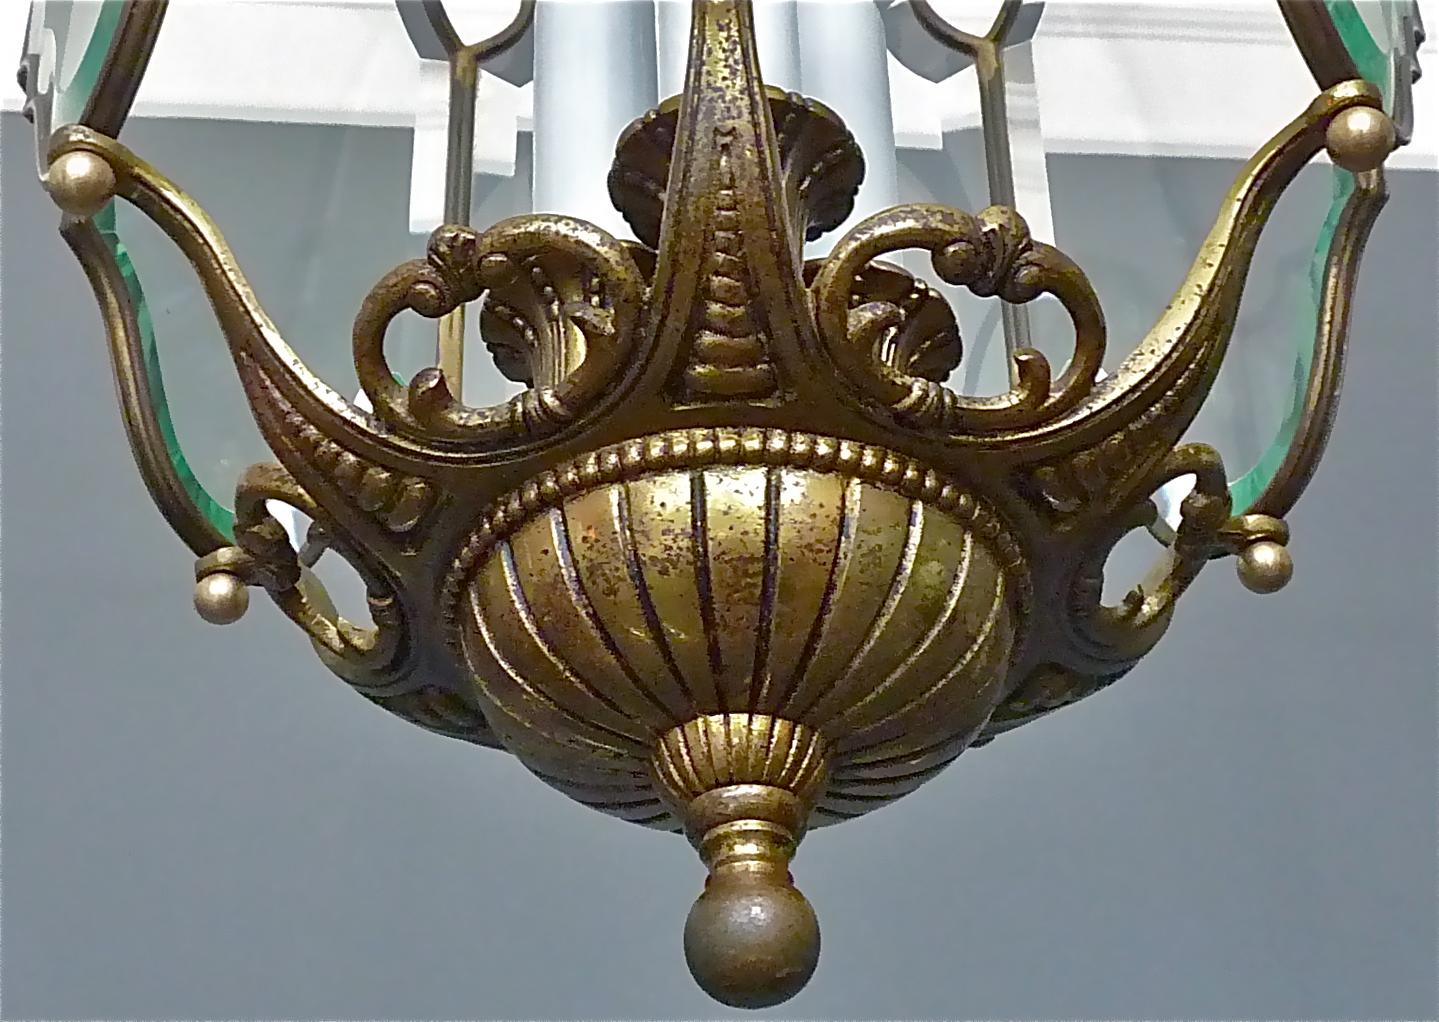 Large Antique French Lantern Lamp Faceted Crystal Glass Bronze Brass 1880 - 1900 For Sale 2